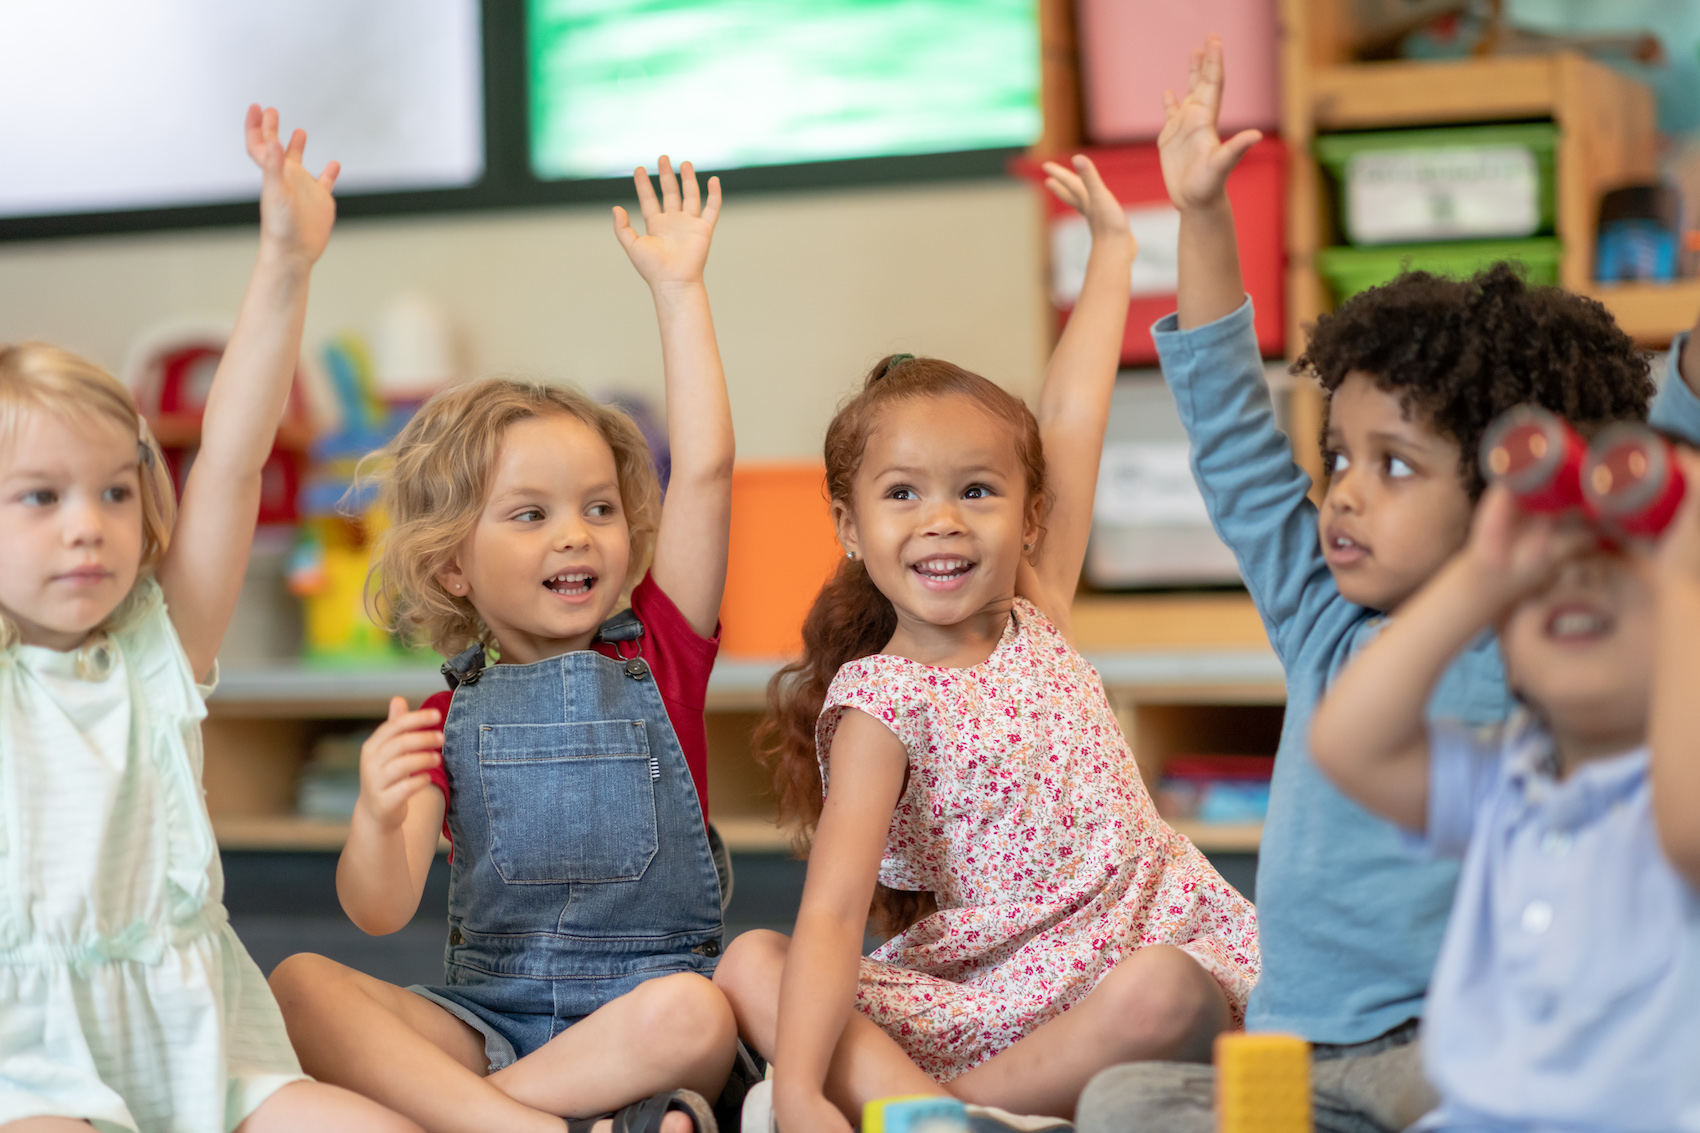 A group of preschool children raise their hand during large group time